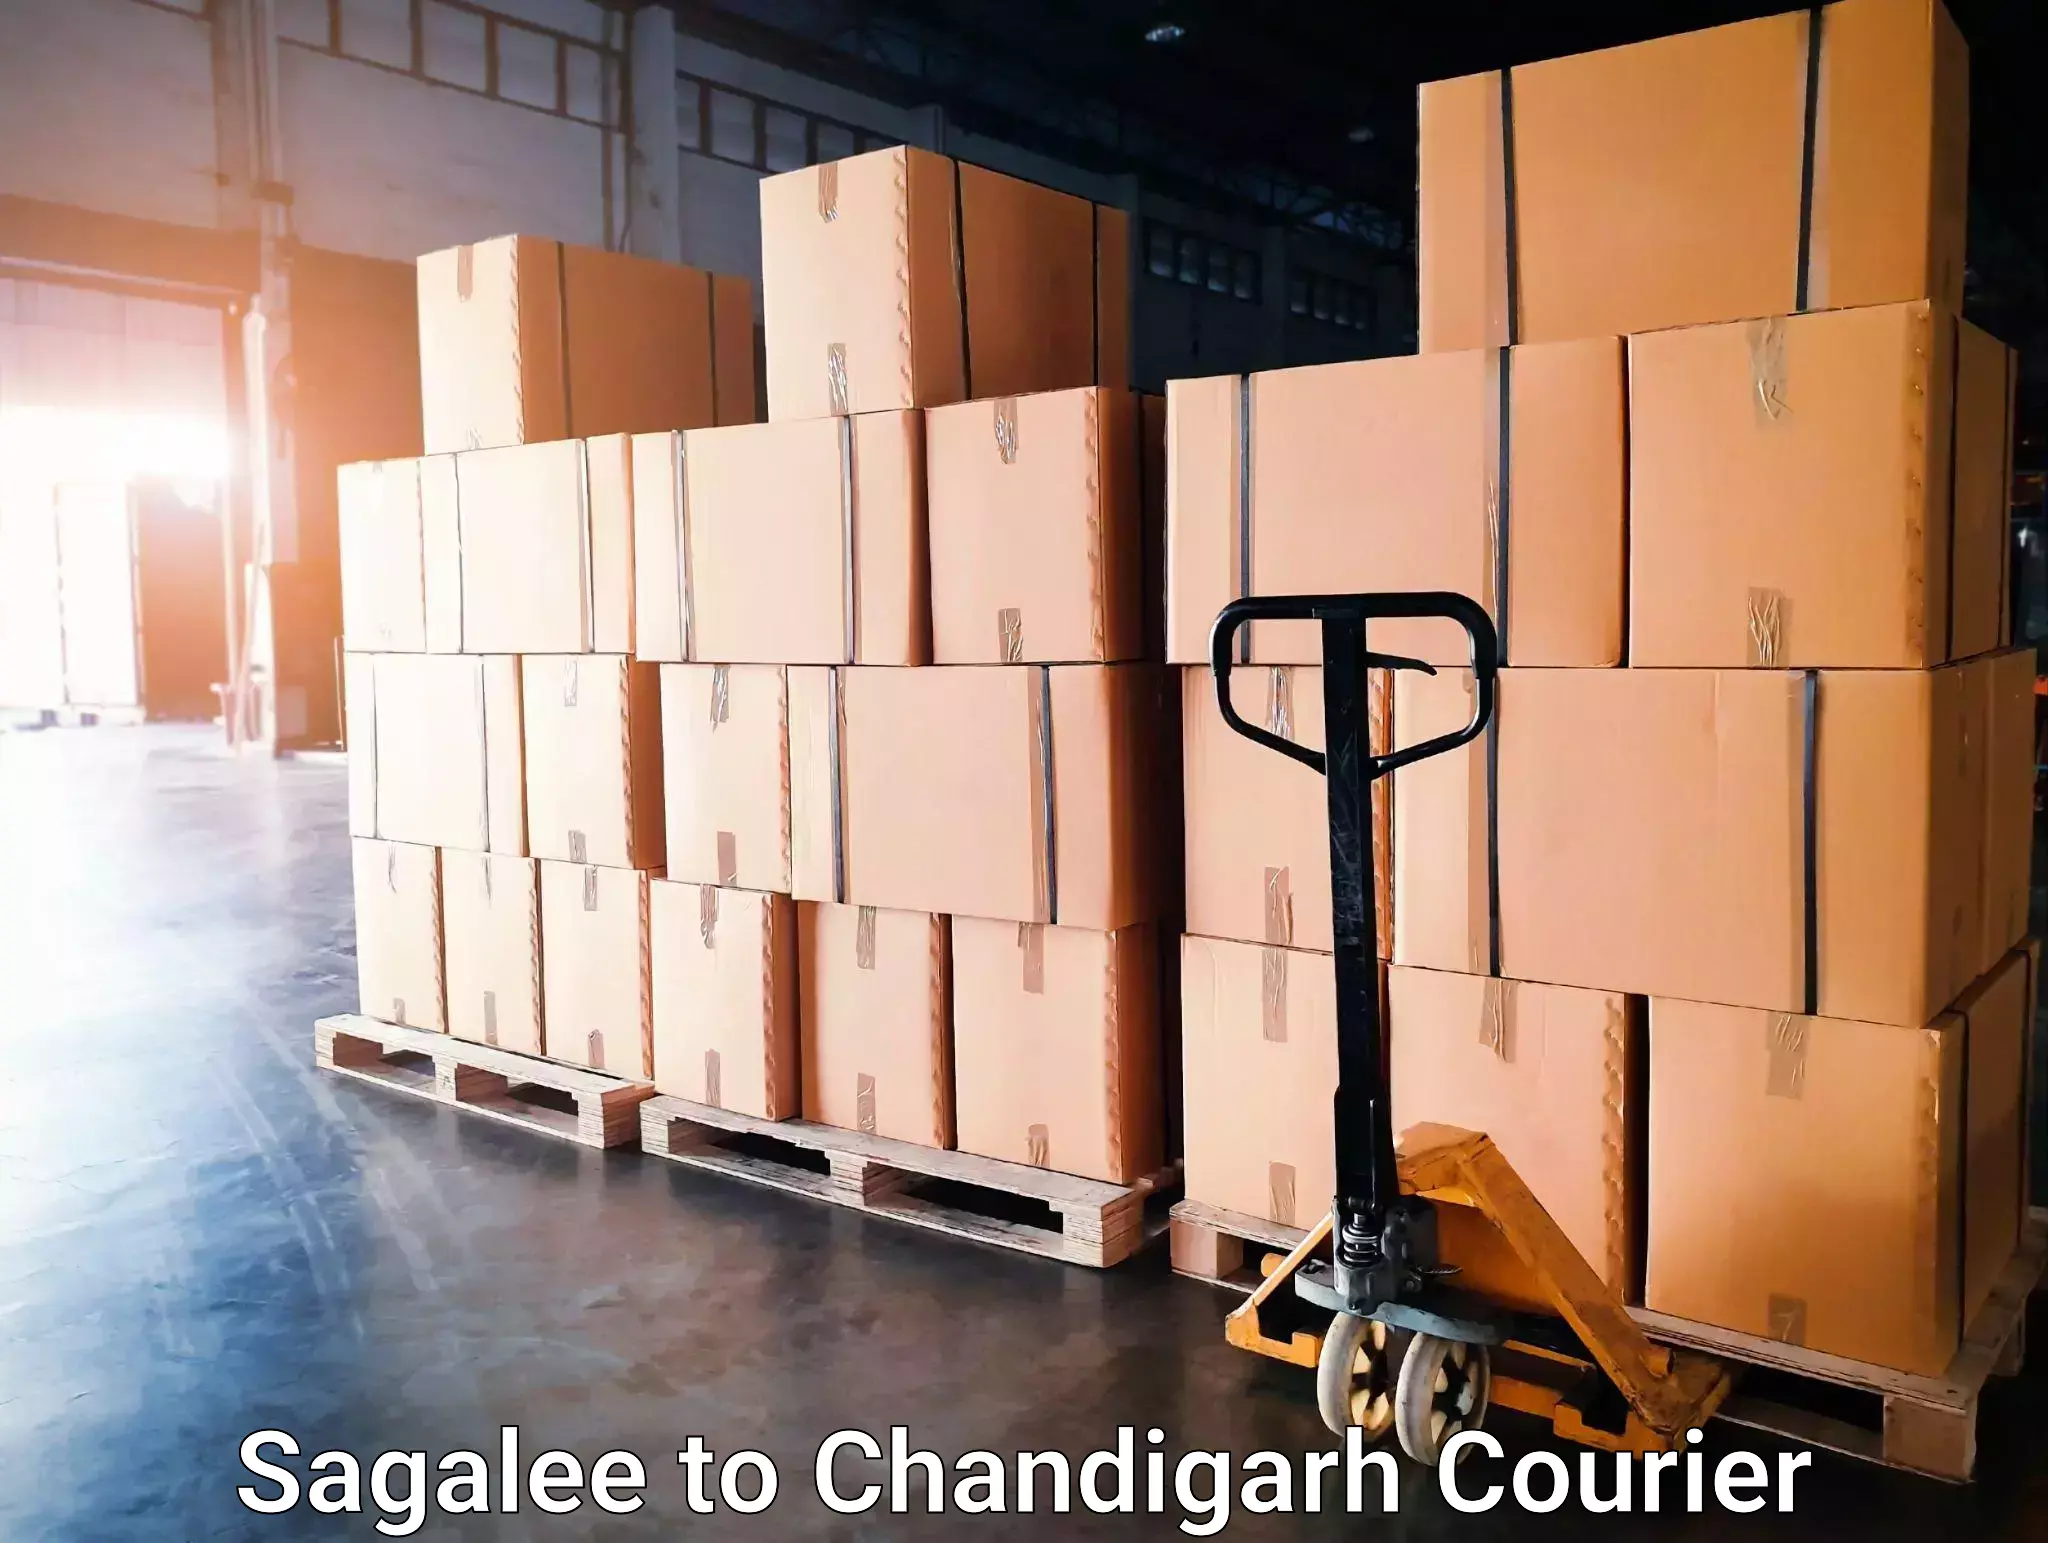 Express delivery network Sagalee to Chandigarh